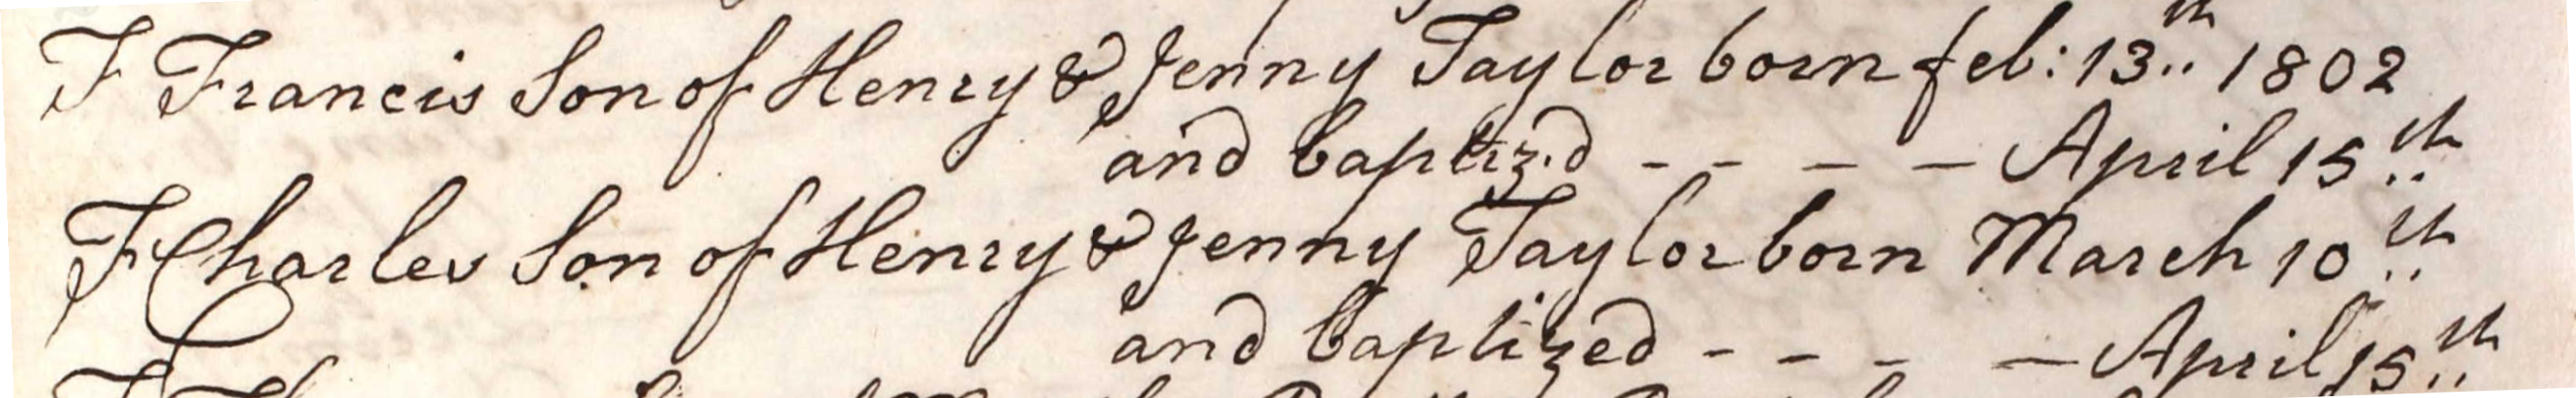 Figure 1: Entry in the Baptism Register of All Saints Farley for Francis and his brother Charles Taylor